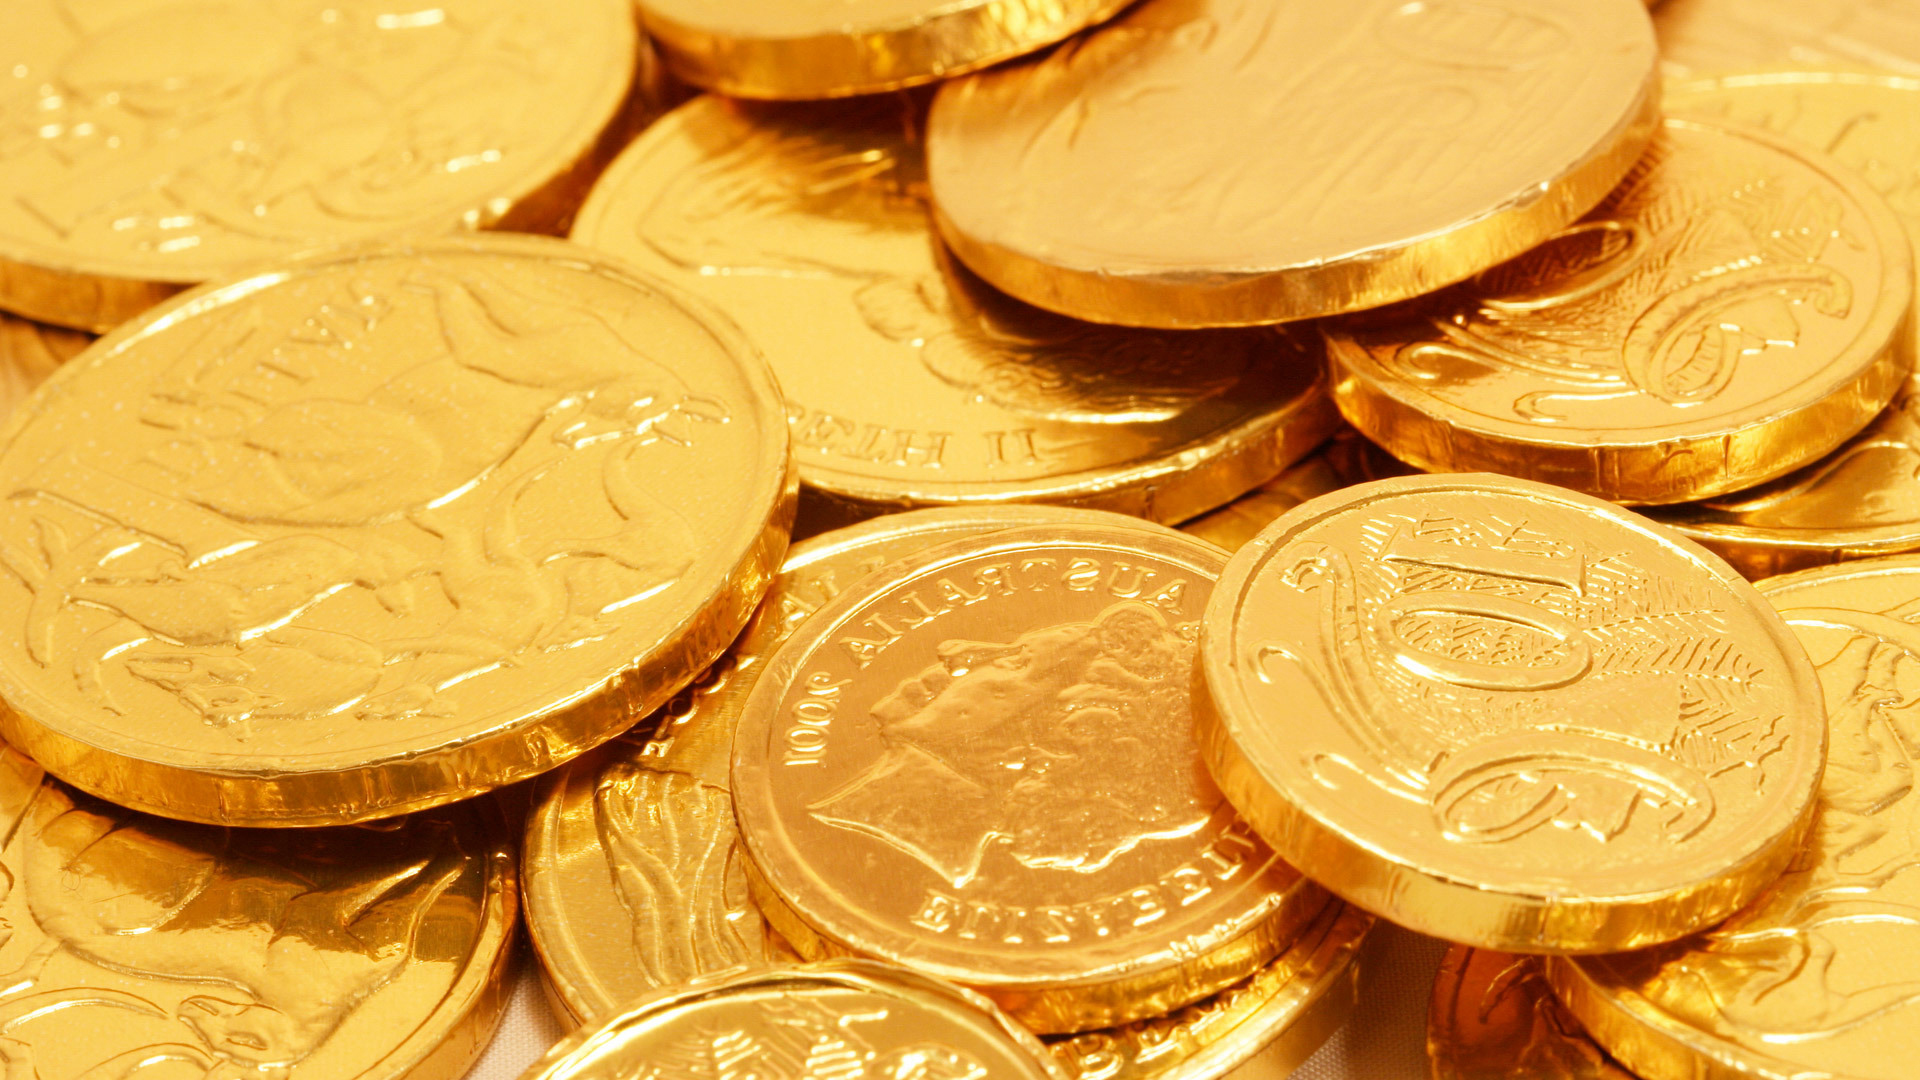 Gold coins stacking background creative image_picture free download  401749315_lovepik.com